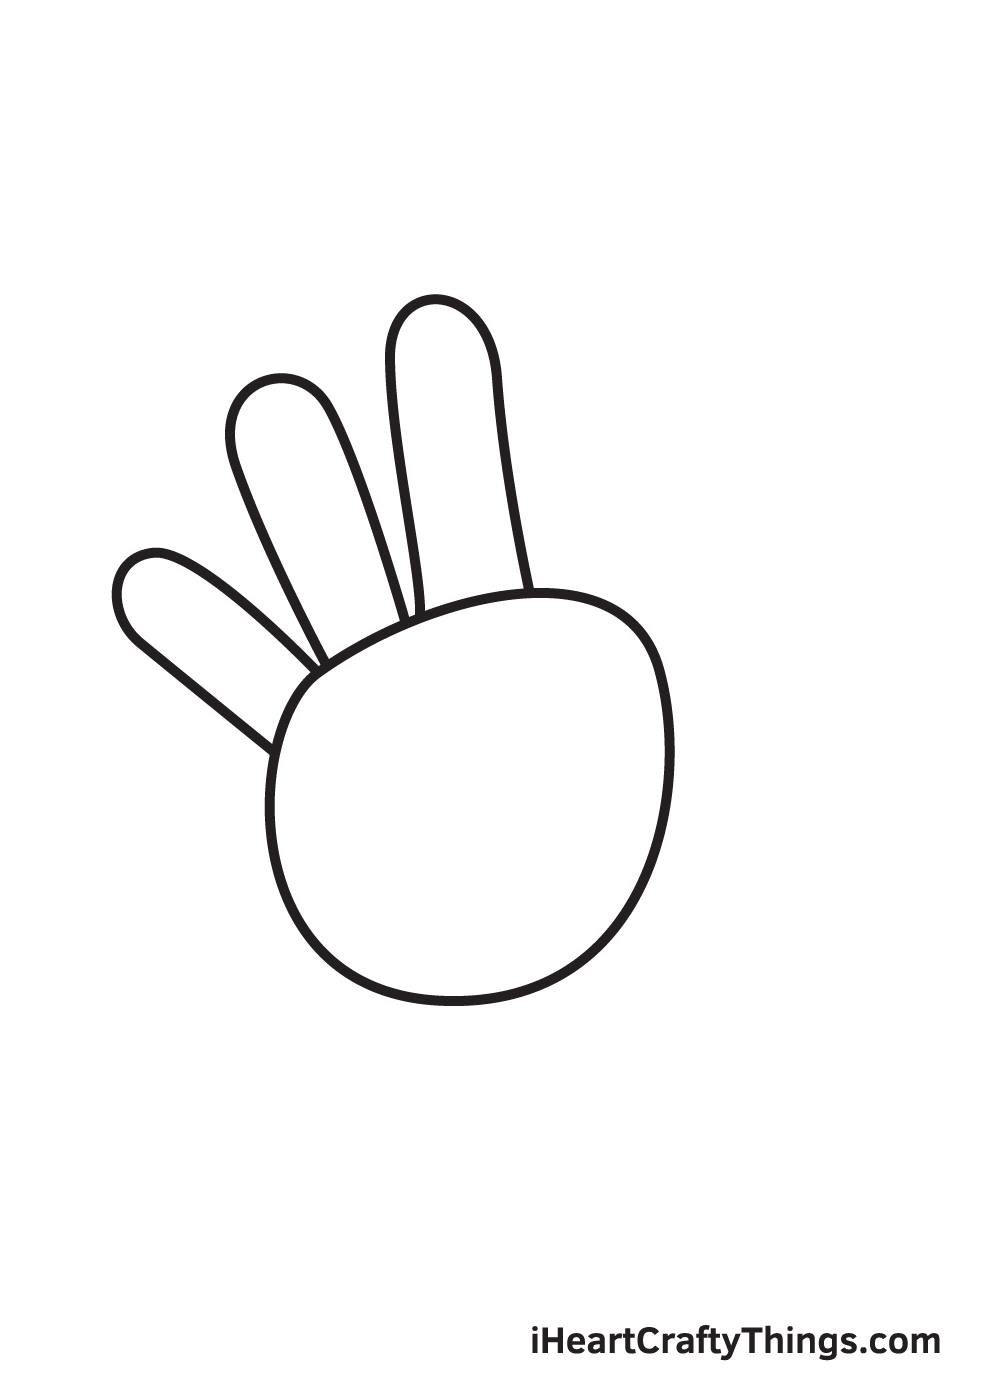 draw a middle finger